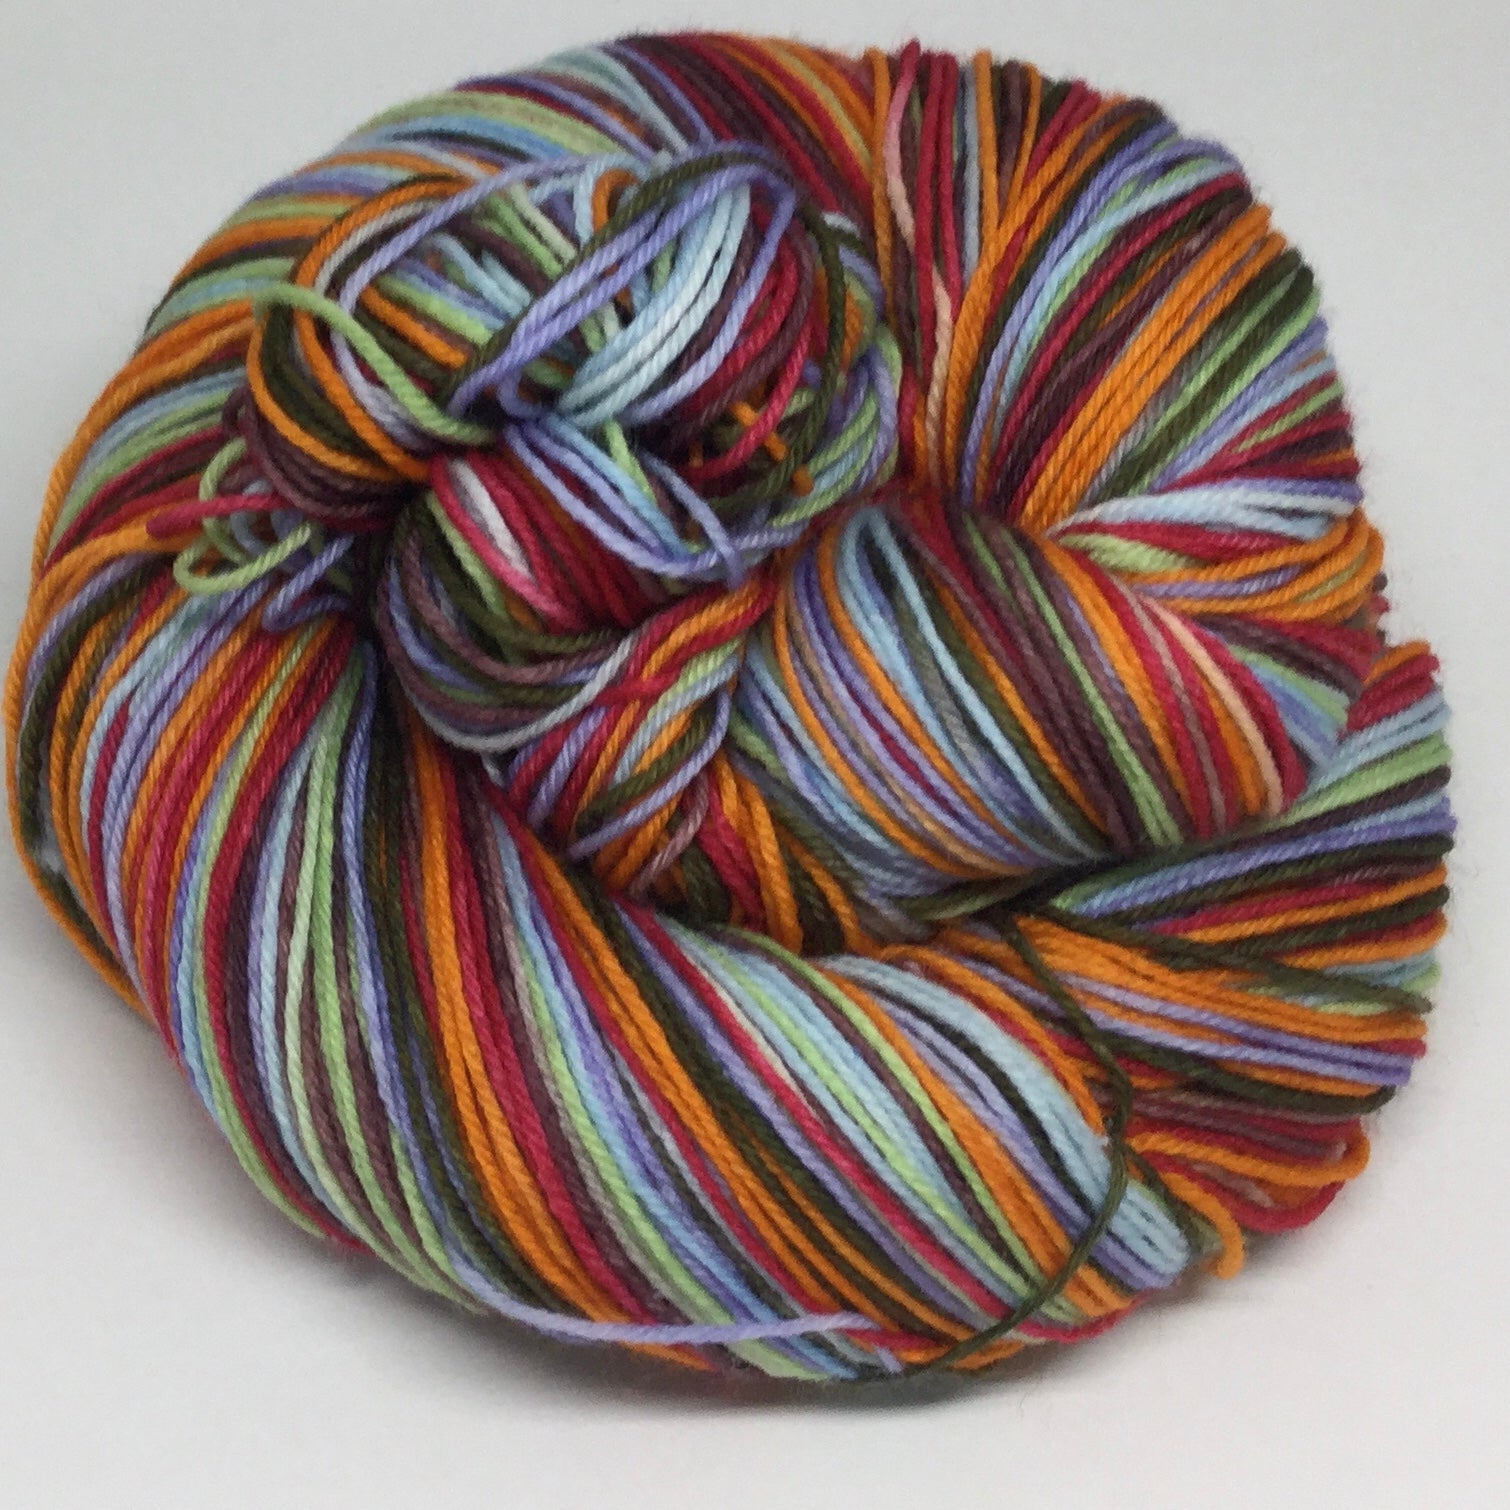 This Self-Striping Yarn Makes Pictures On Its Own!